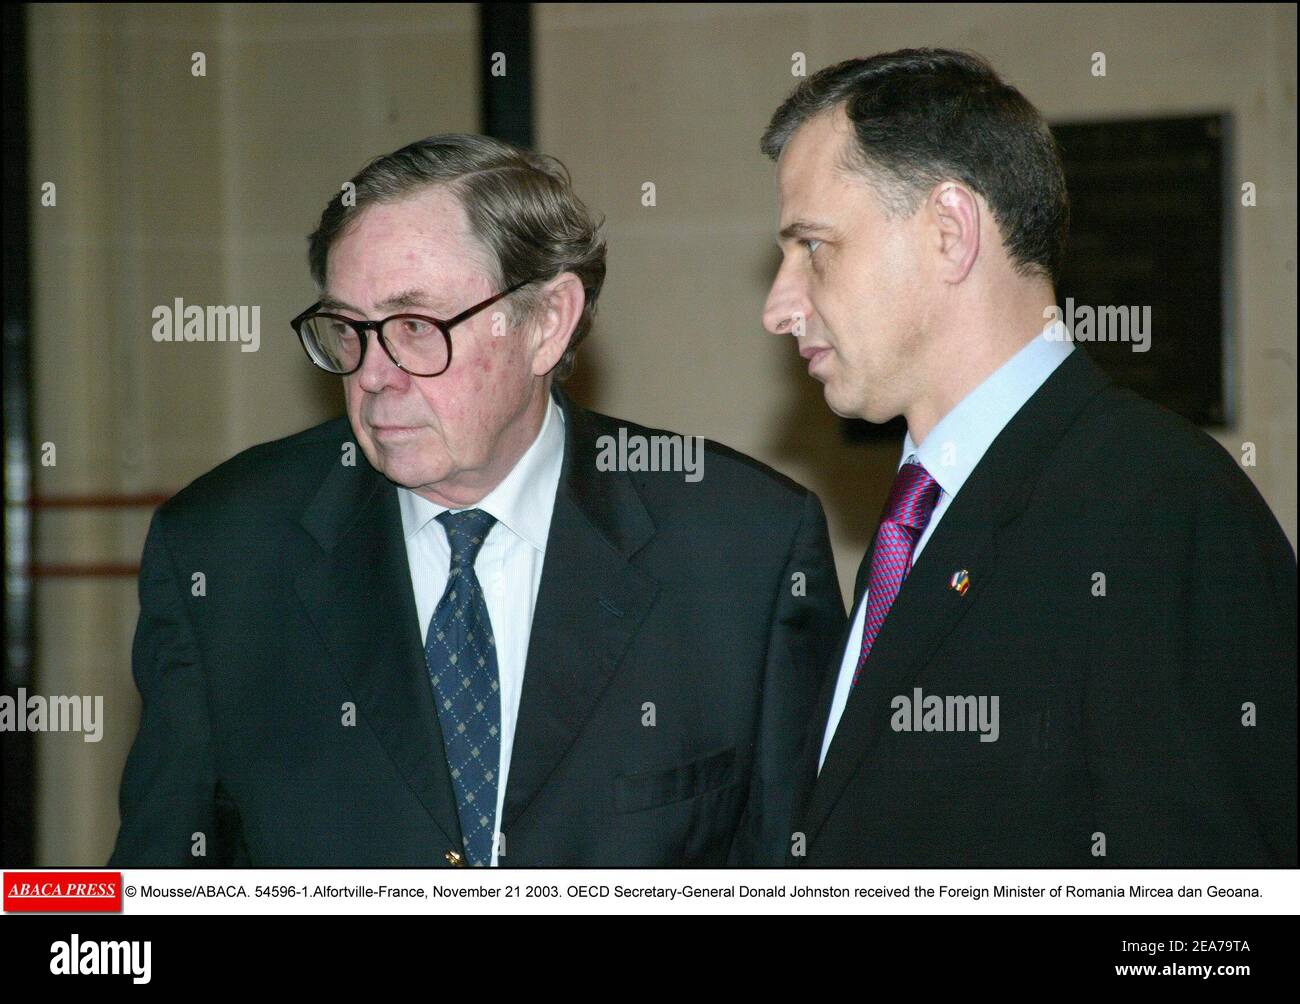 © Mousse/ABACA. 54596-1.Alfortville-France, November 21 2003. OECD Secretary-General Donald Johnston received the Foreign Minister of Romania Mircea dan Geoana. Stock Photo